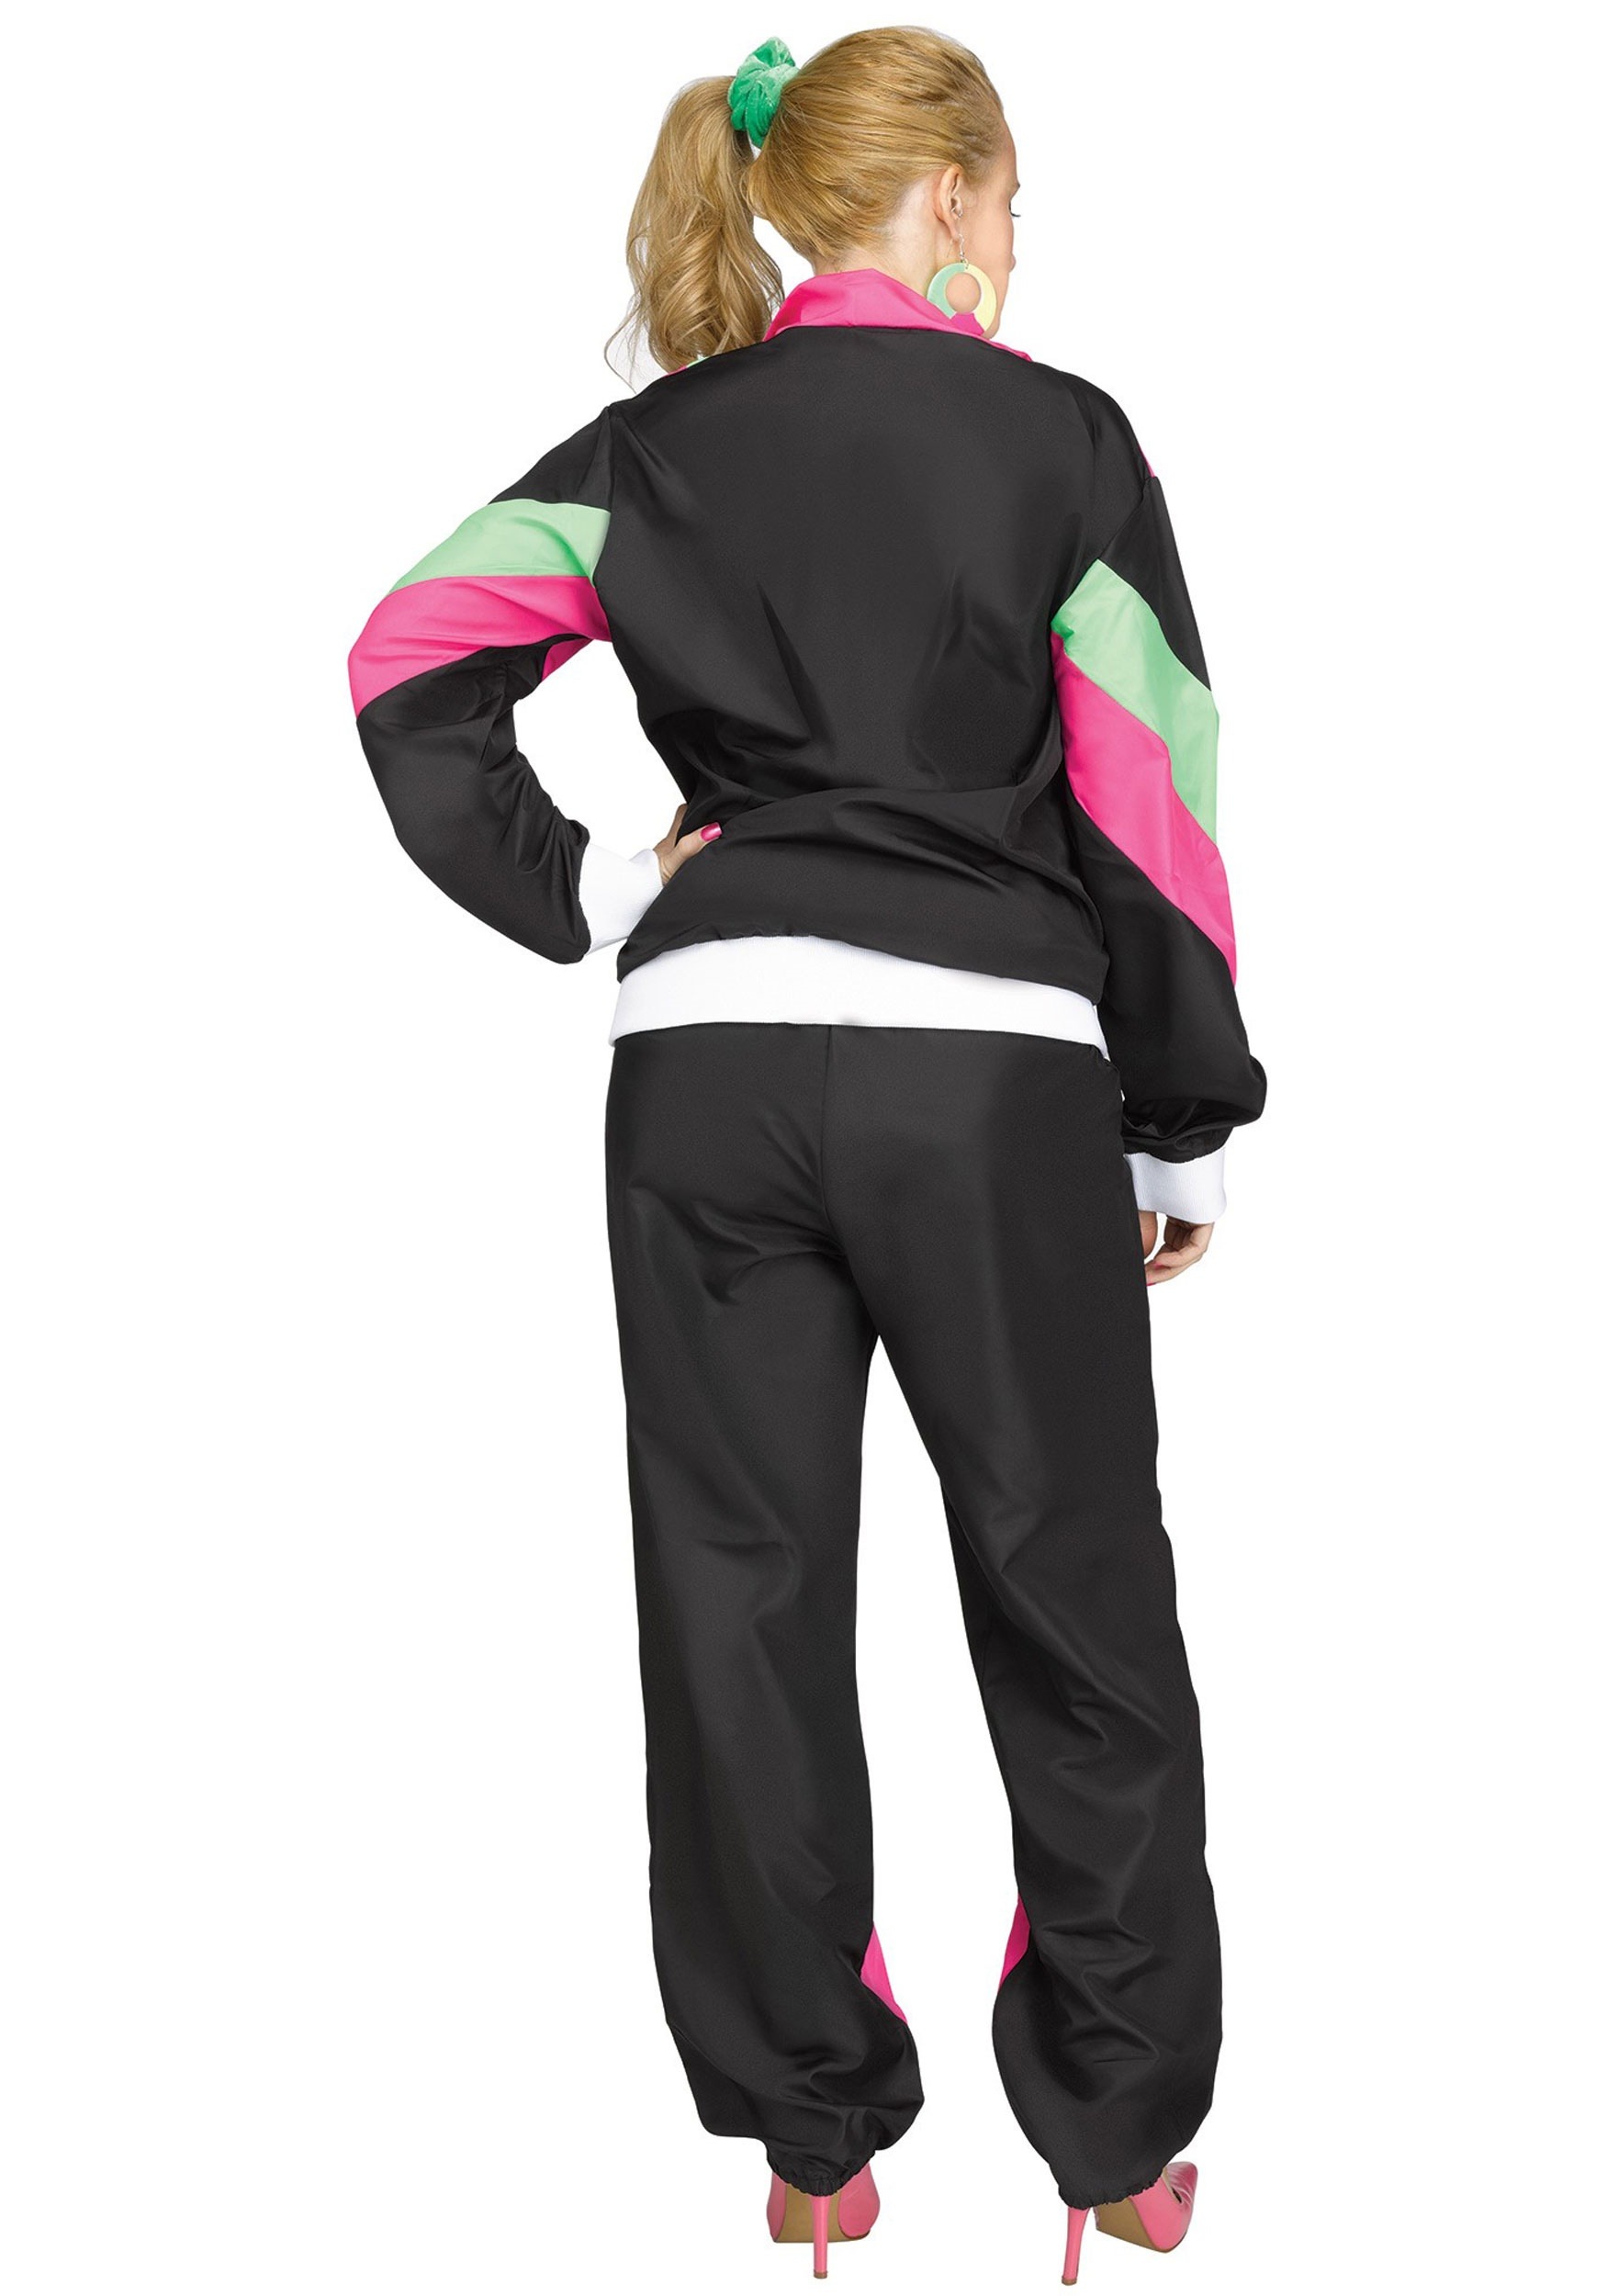 80's Track Suit Plus Size Costume For Women , 1980s Costumes